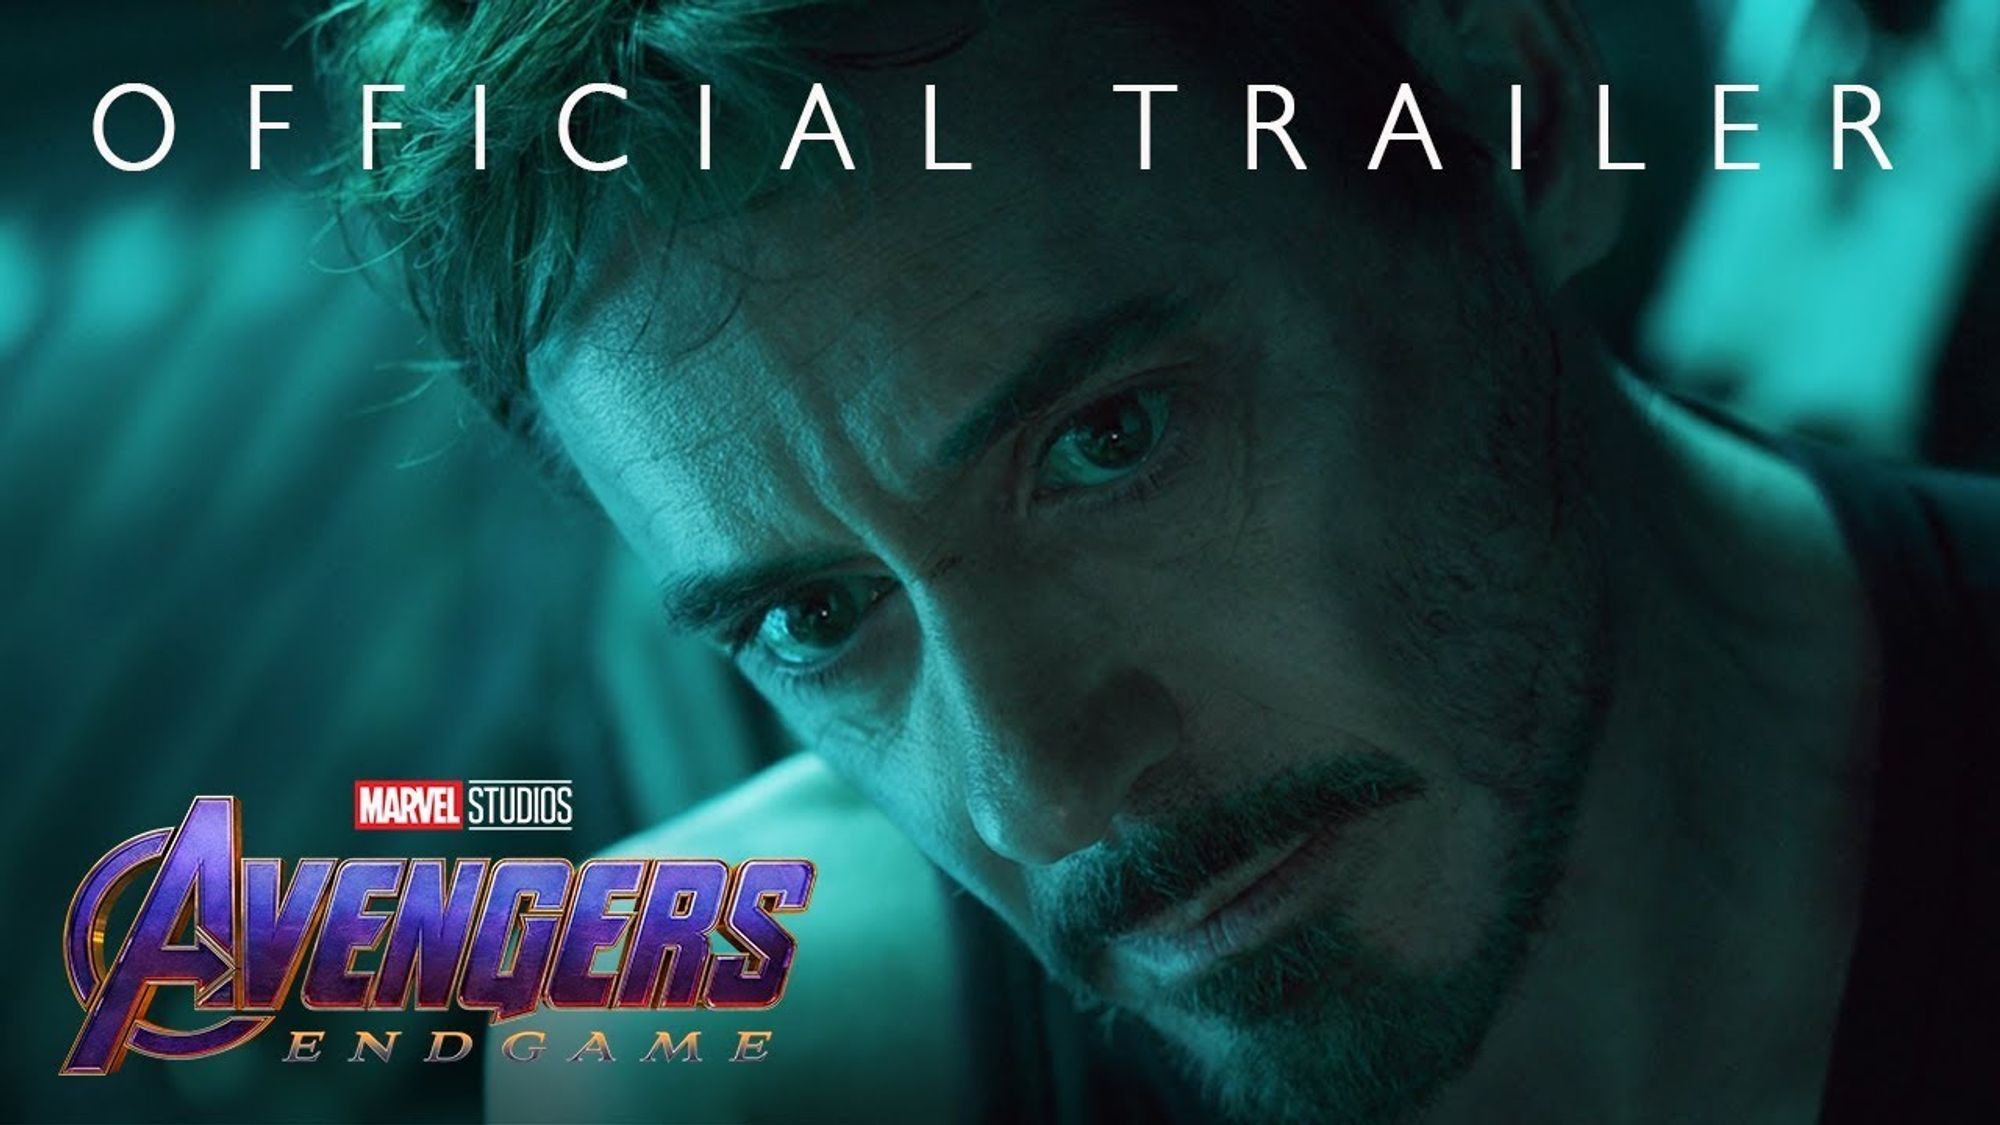 Review: “Avengers: Endgame” Is A Mind-Bending And Emotionally